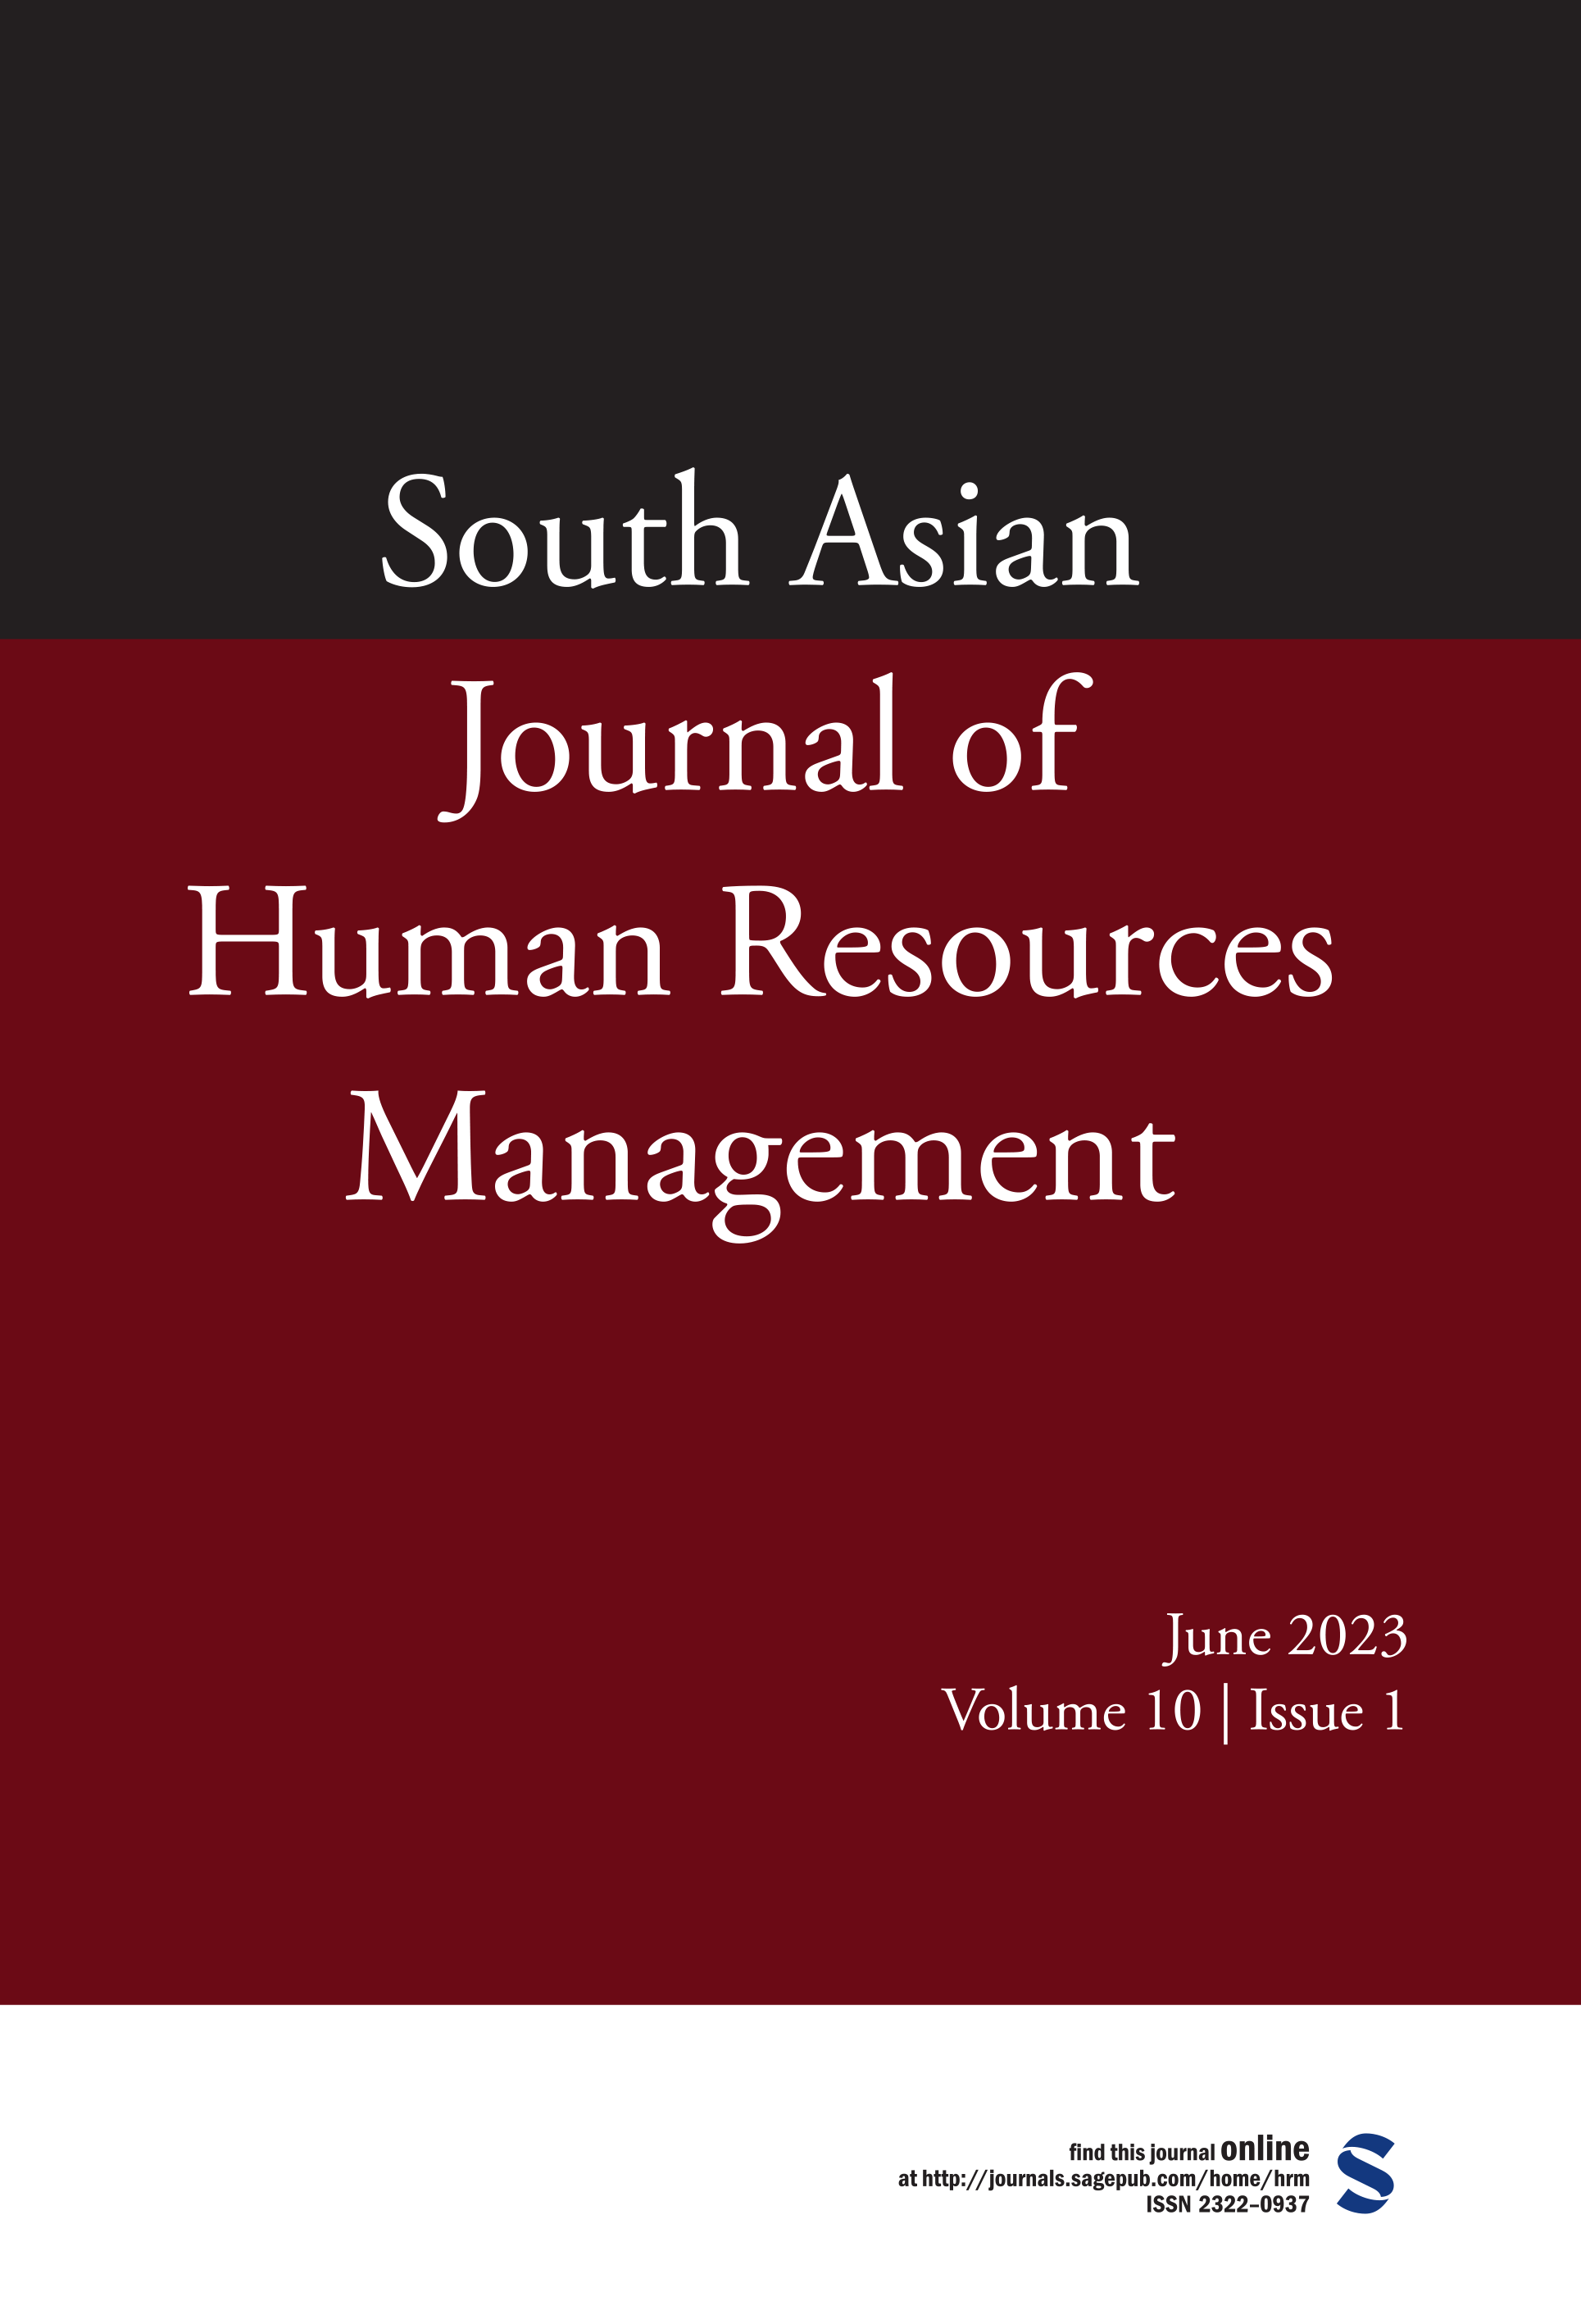 South Asian journal of human resources management.